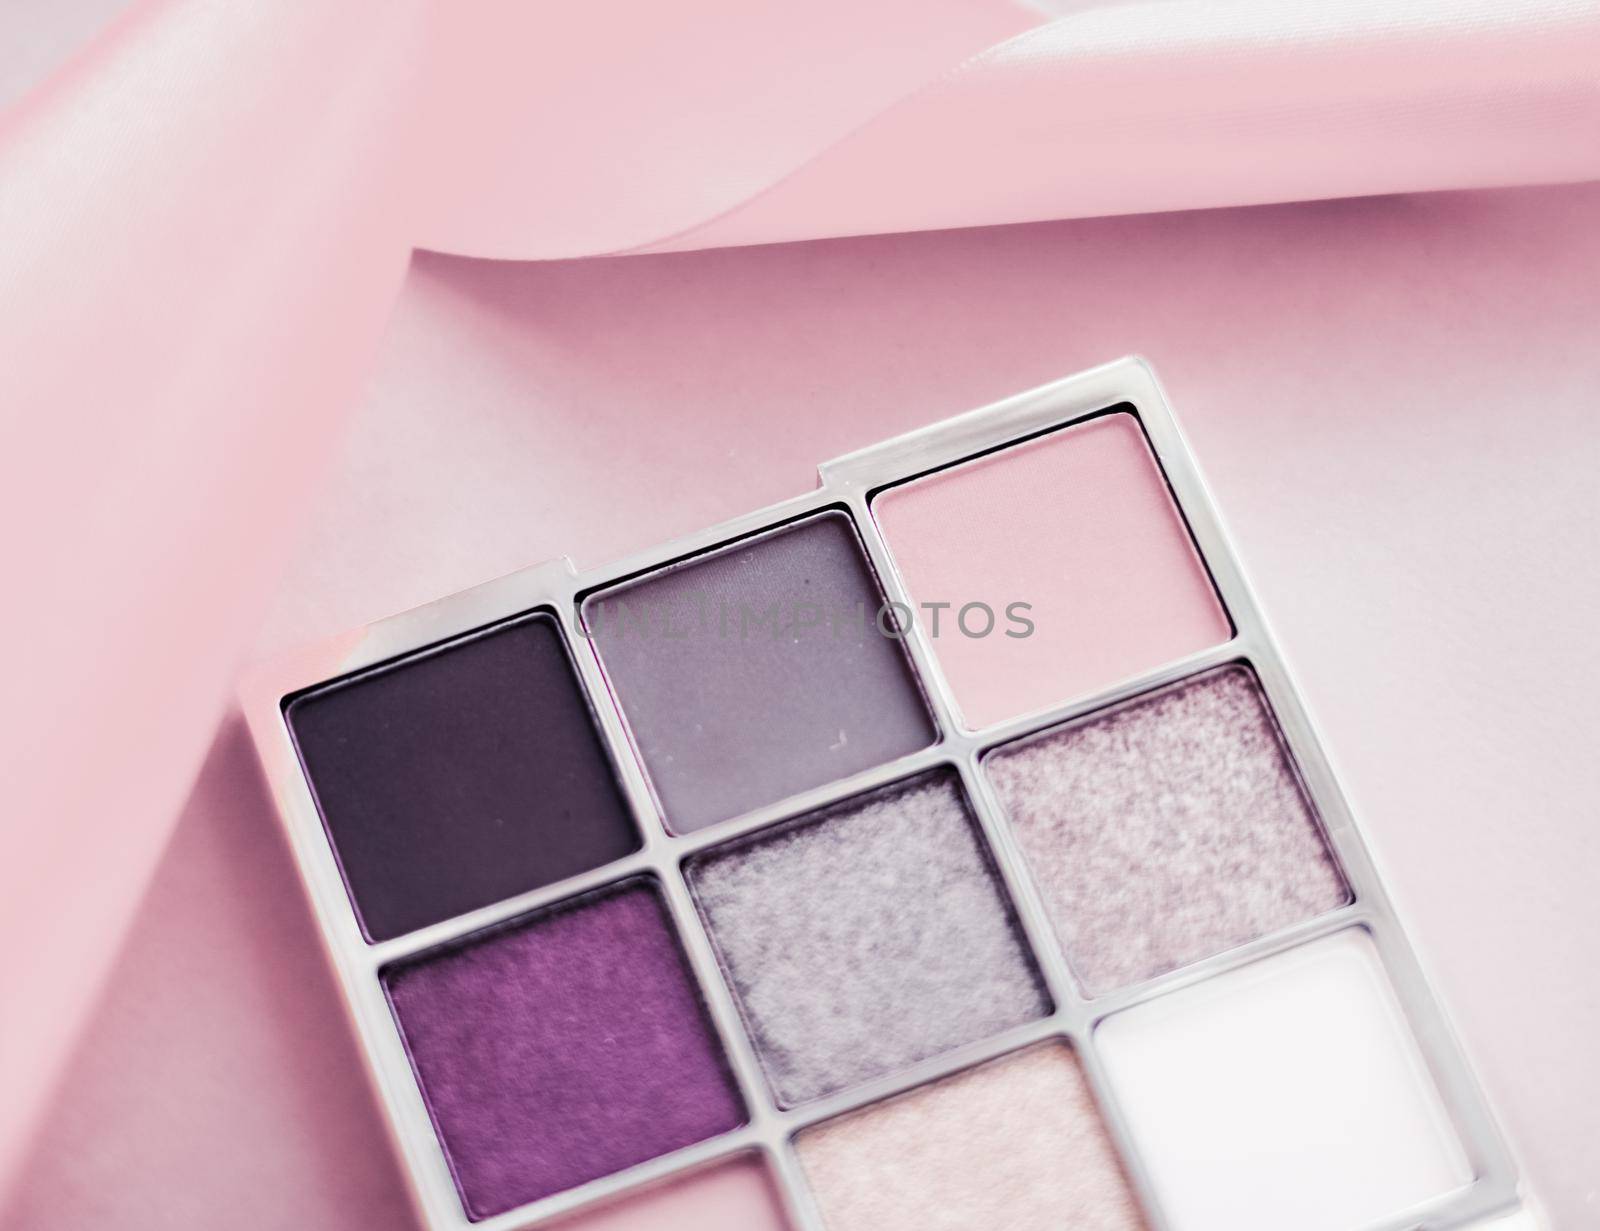 Eyeshadow palette and make-up brush on blush pink background, eye shadows cosmetics product as luxury beauty brand promotion and holiday fashion blog design by Anneleven